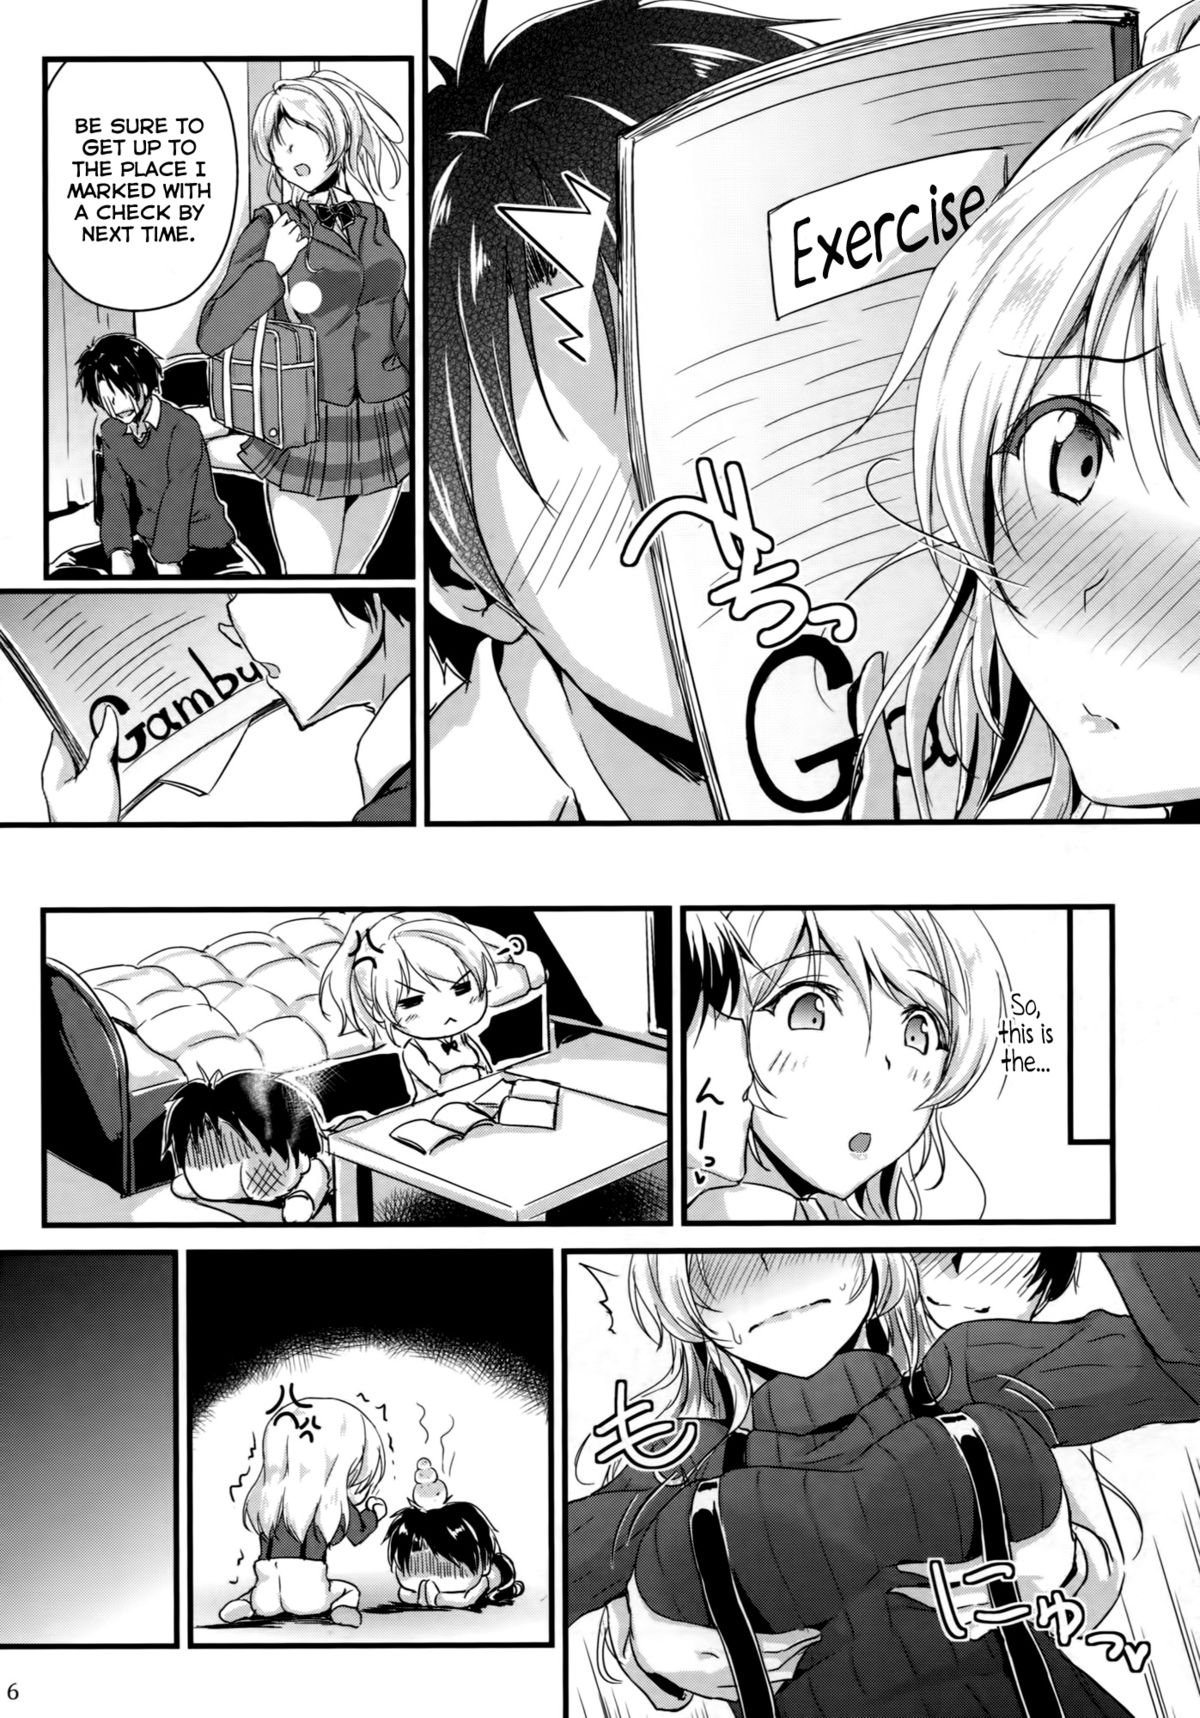 (C87) [Nuno no Ie (Moonlight)] Let's Study××× 5 (Love Live!) [English] [Facedesk] page 5 full